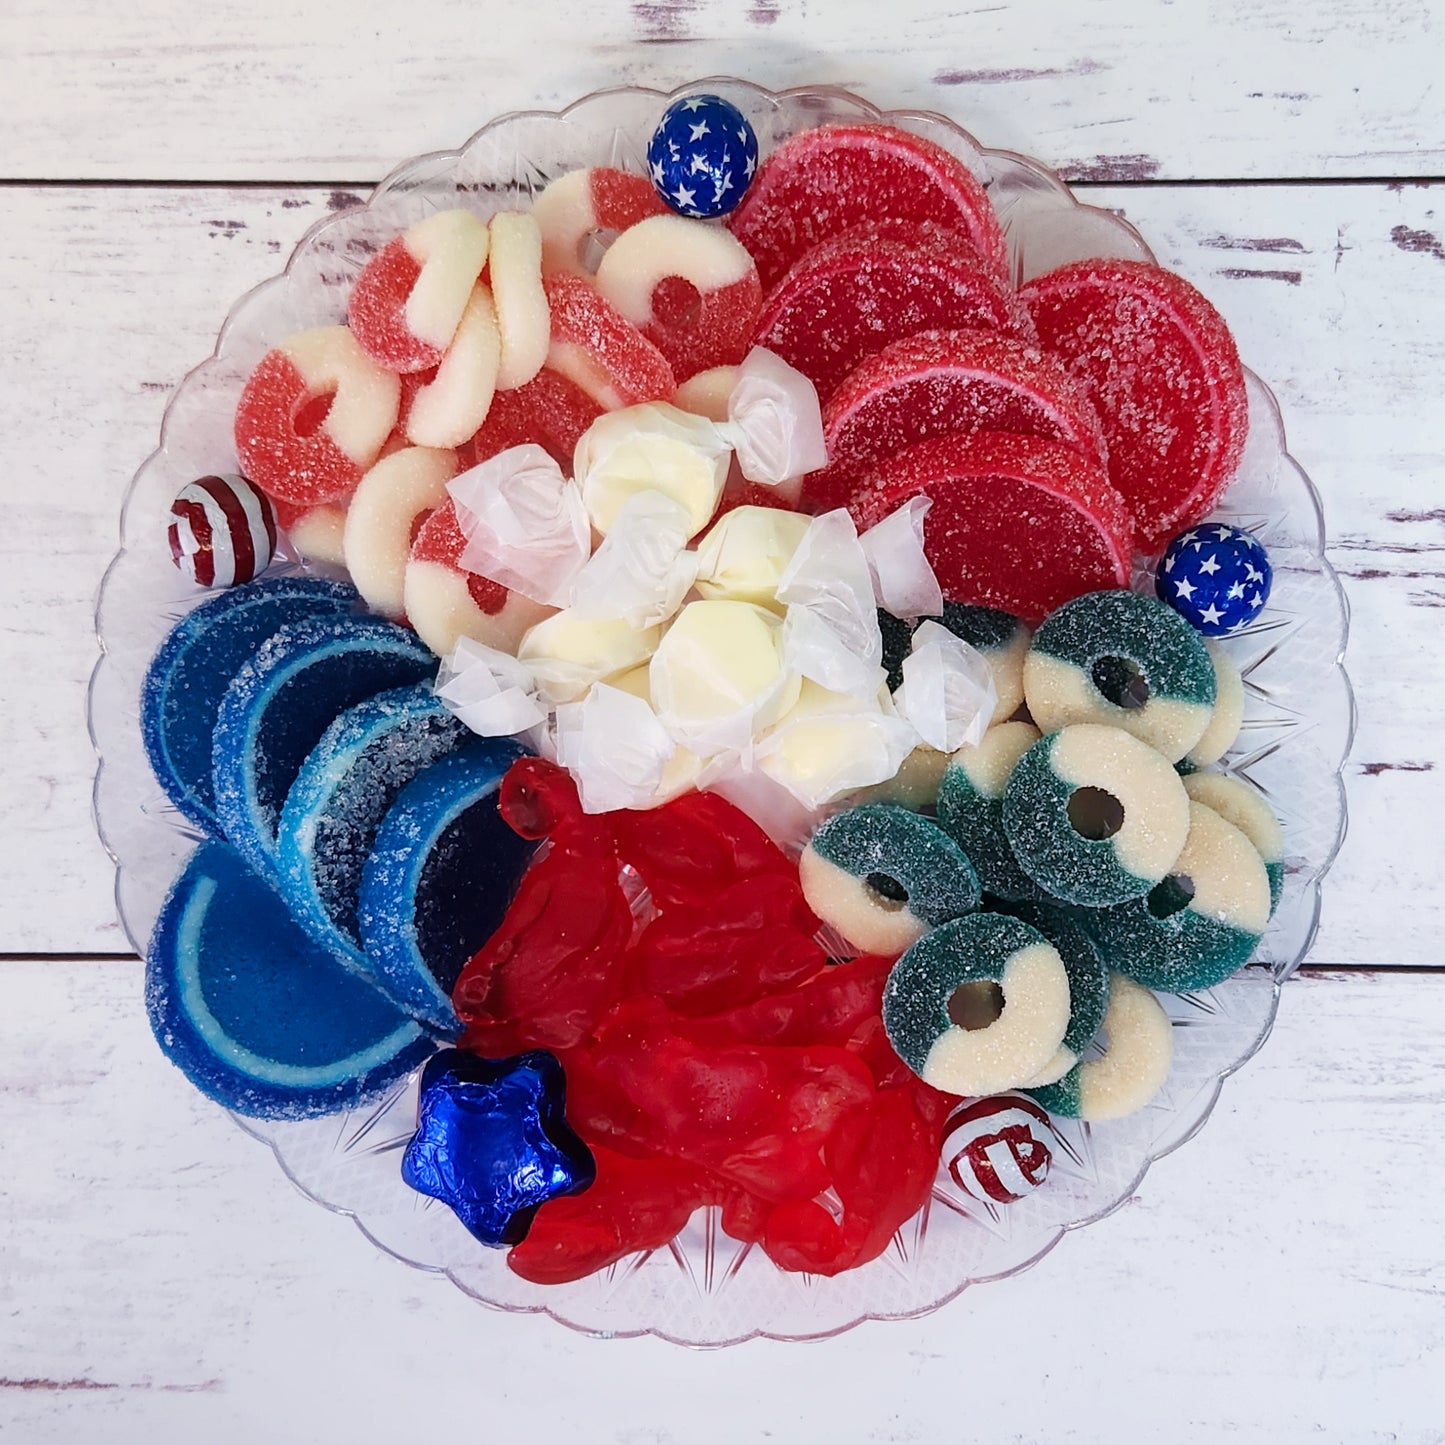 Brighten your summer festivities with our Summer Fun Party Dessert Platter, including patriotic Milk Chocolate Foiled Stars and Stripes, vibrant fruit slices, classic salt water taffy, fun gummi lobsters, refreshing watermelon rings, and zesty blue raspberry rings. Overwrapped and adorned with a festive bow, this delightful assortment is perfect for gift-giving or adding a splash of color and flavor to any summer celebration.